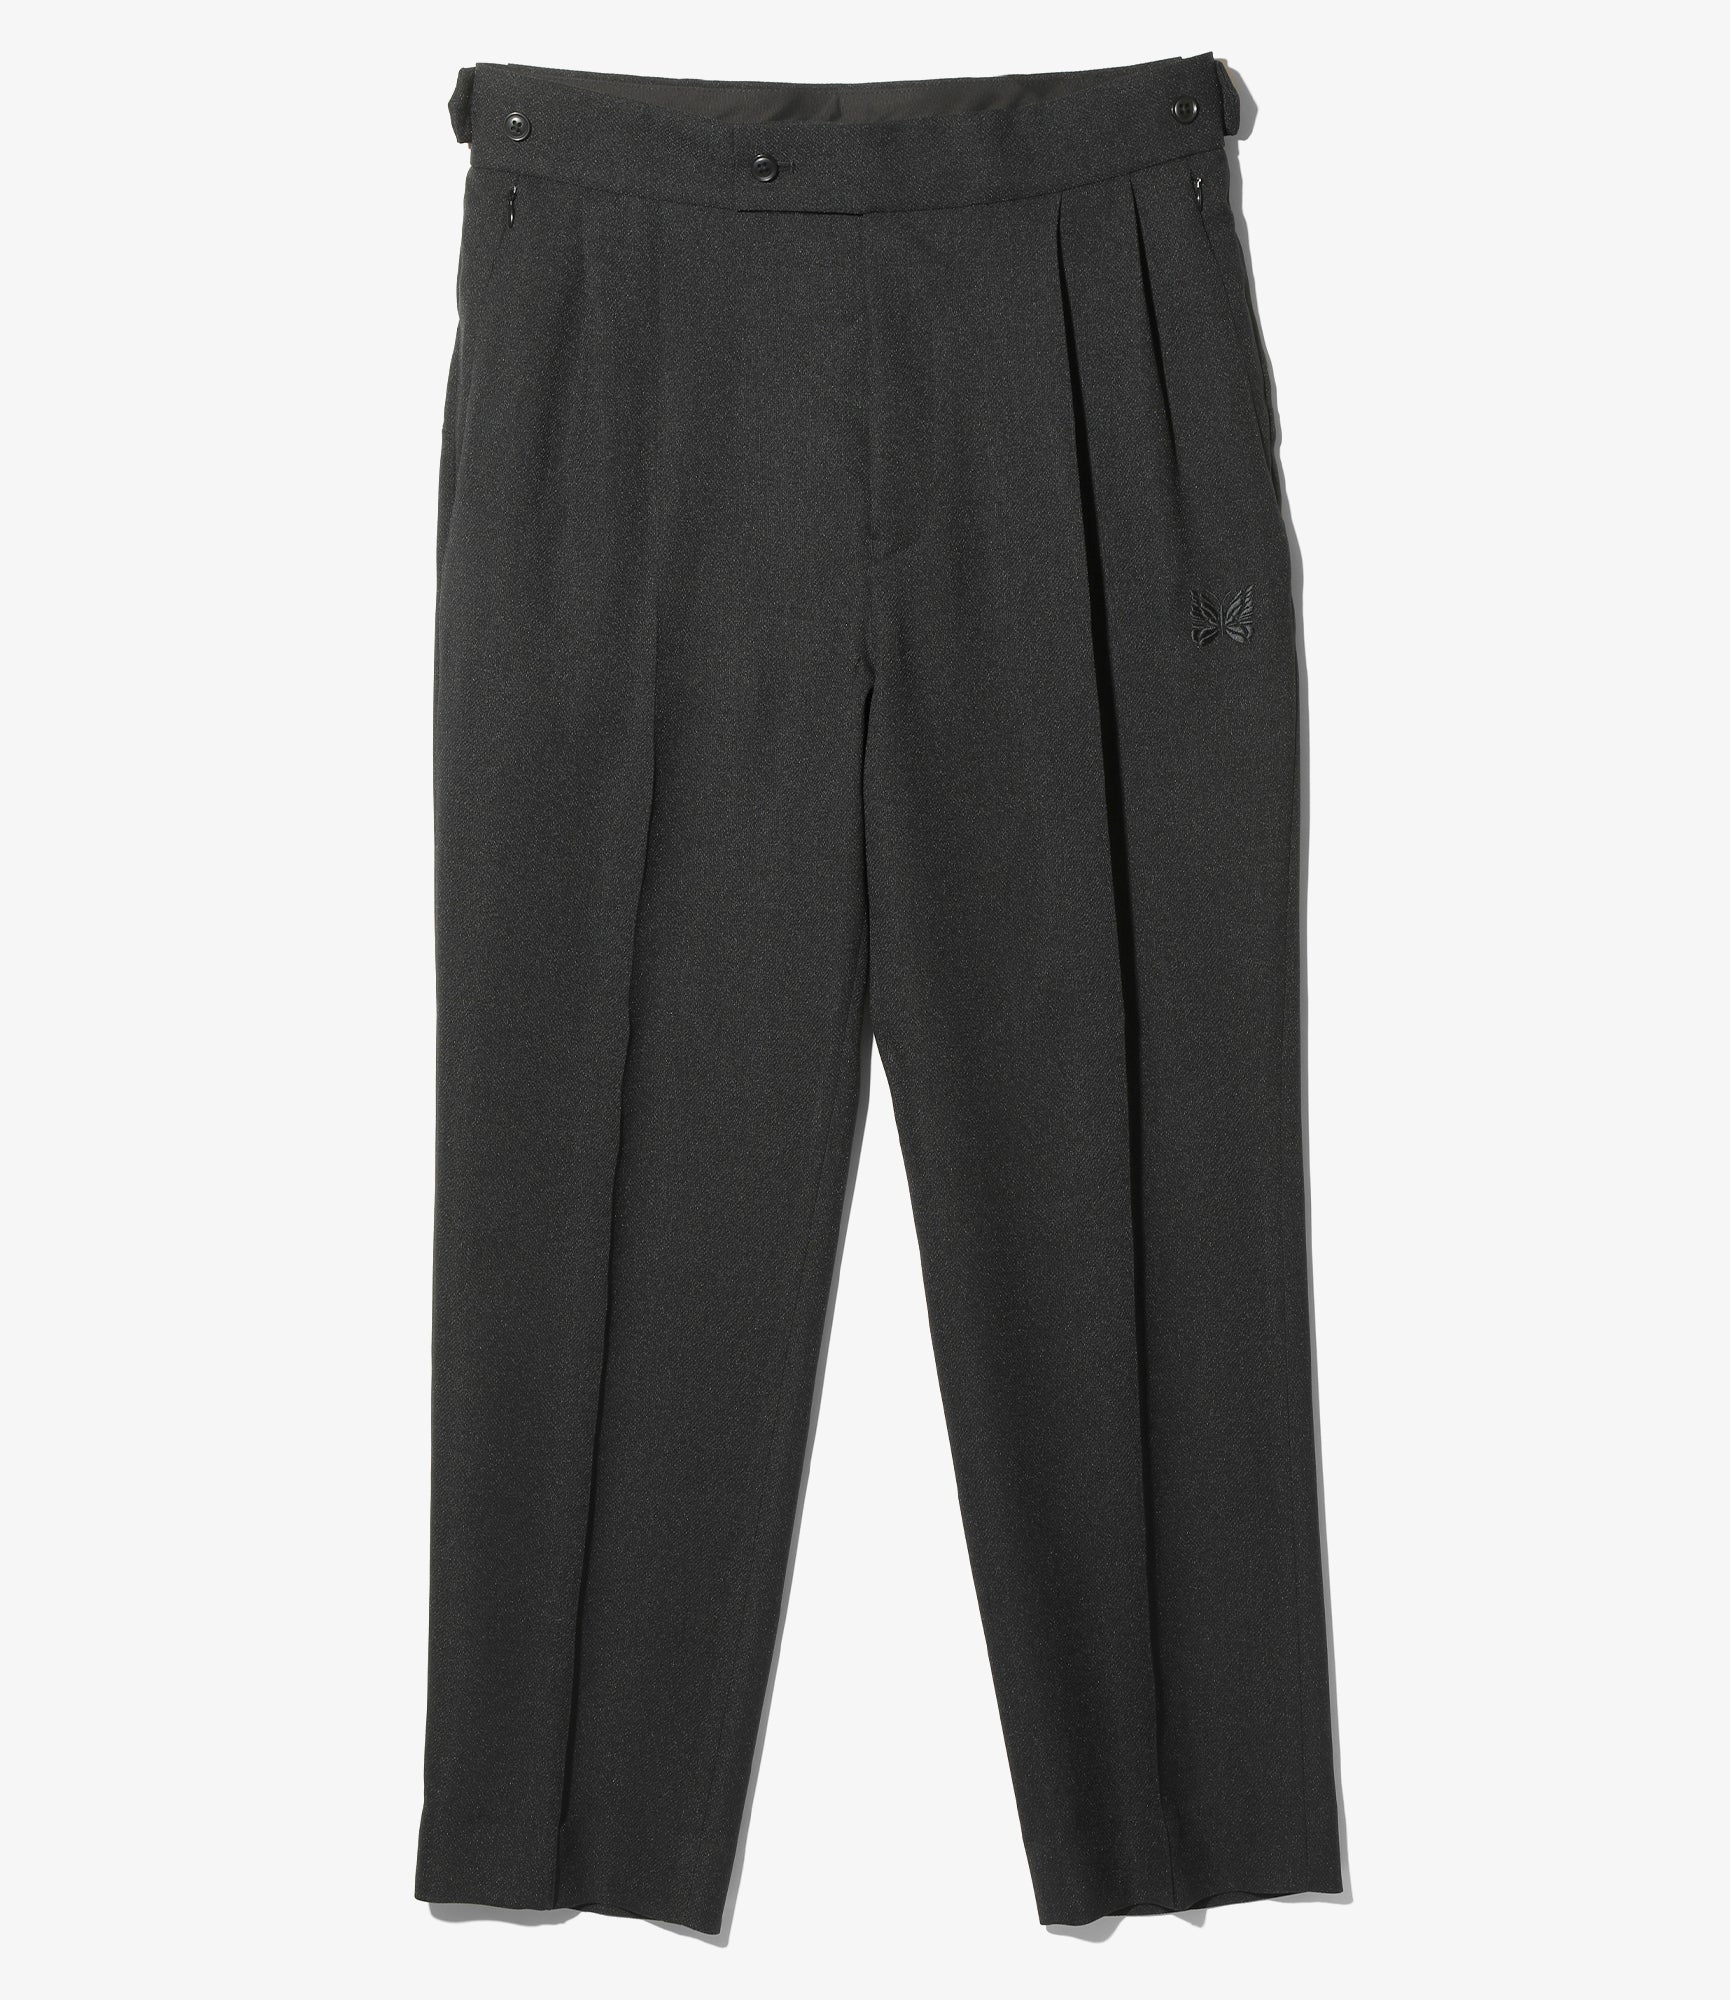 Needles Tucked Side Tab Trouser - Poly Dobby Cloth - Black